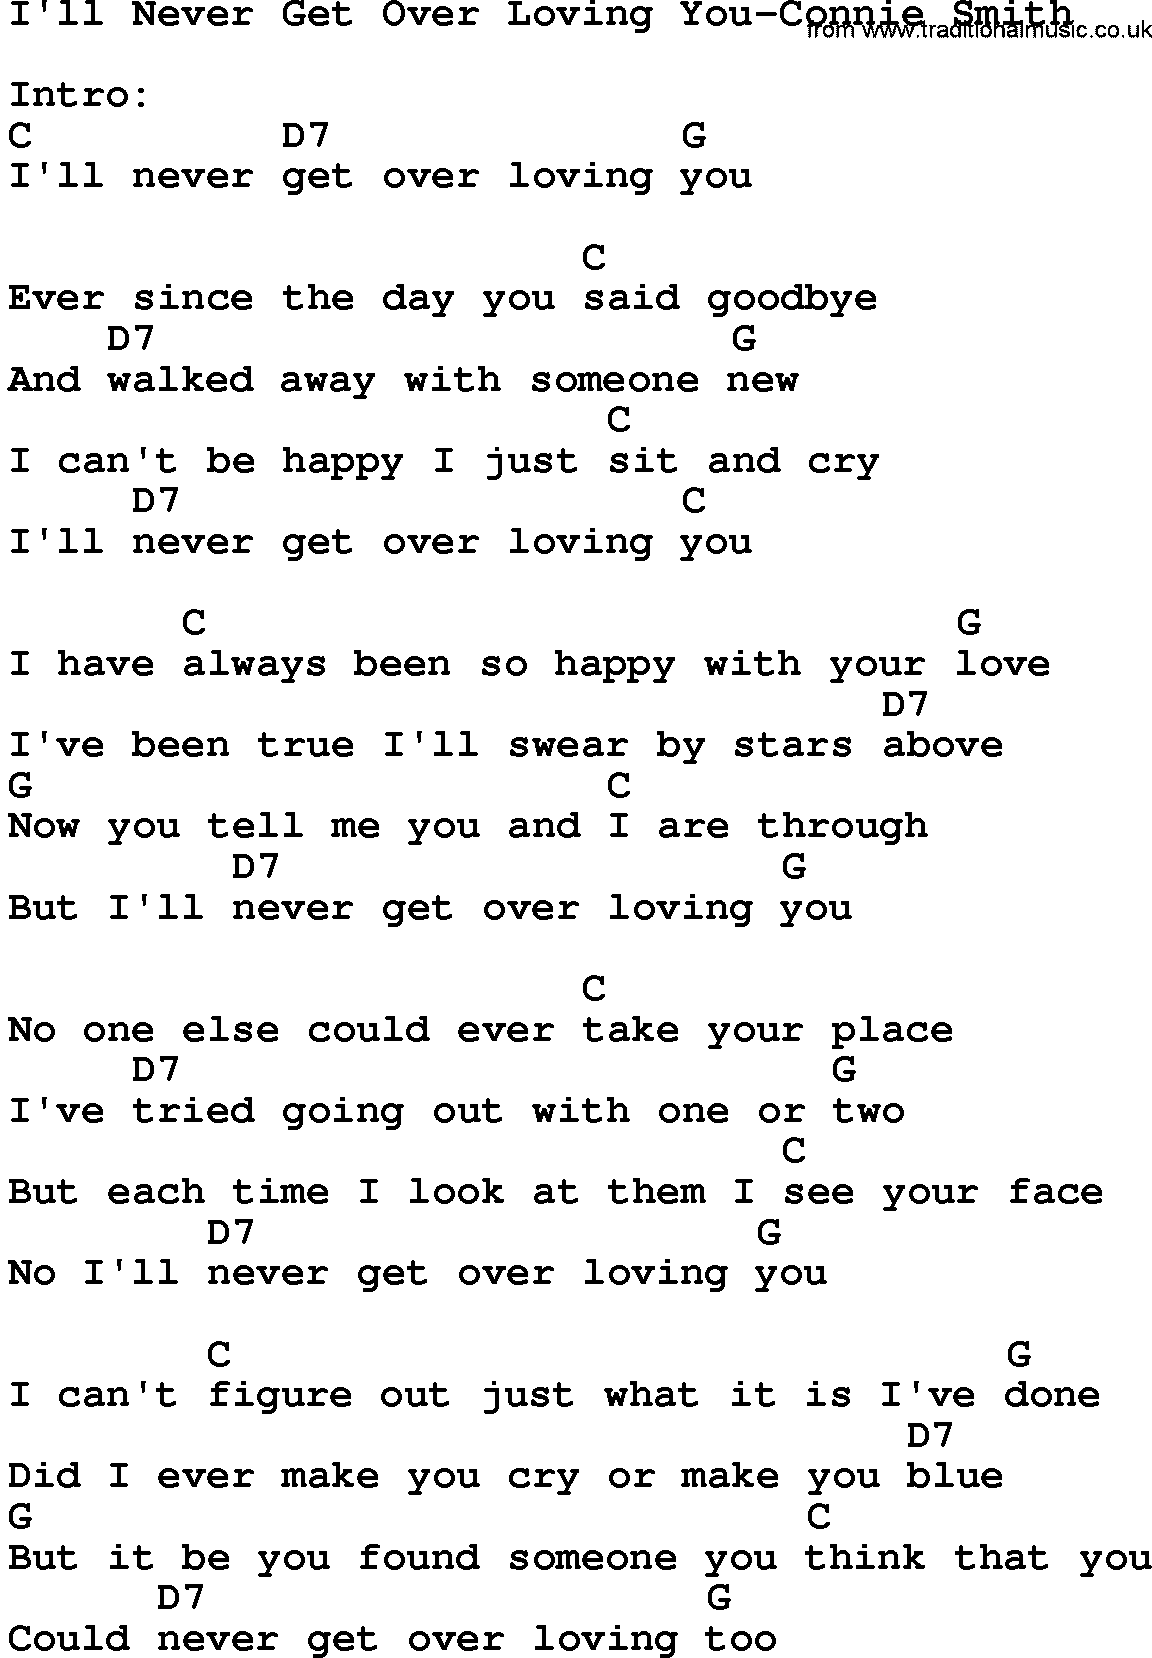 Country music song: I'll Never Get Over Loving You-Connie Smith lyrics and chords